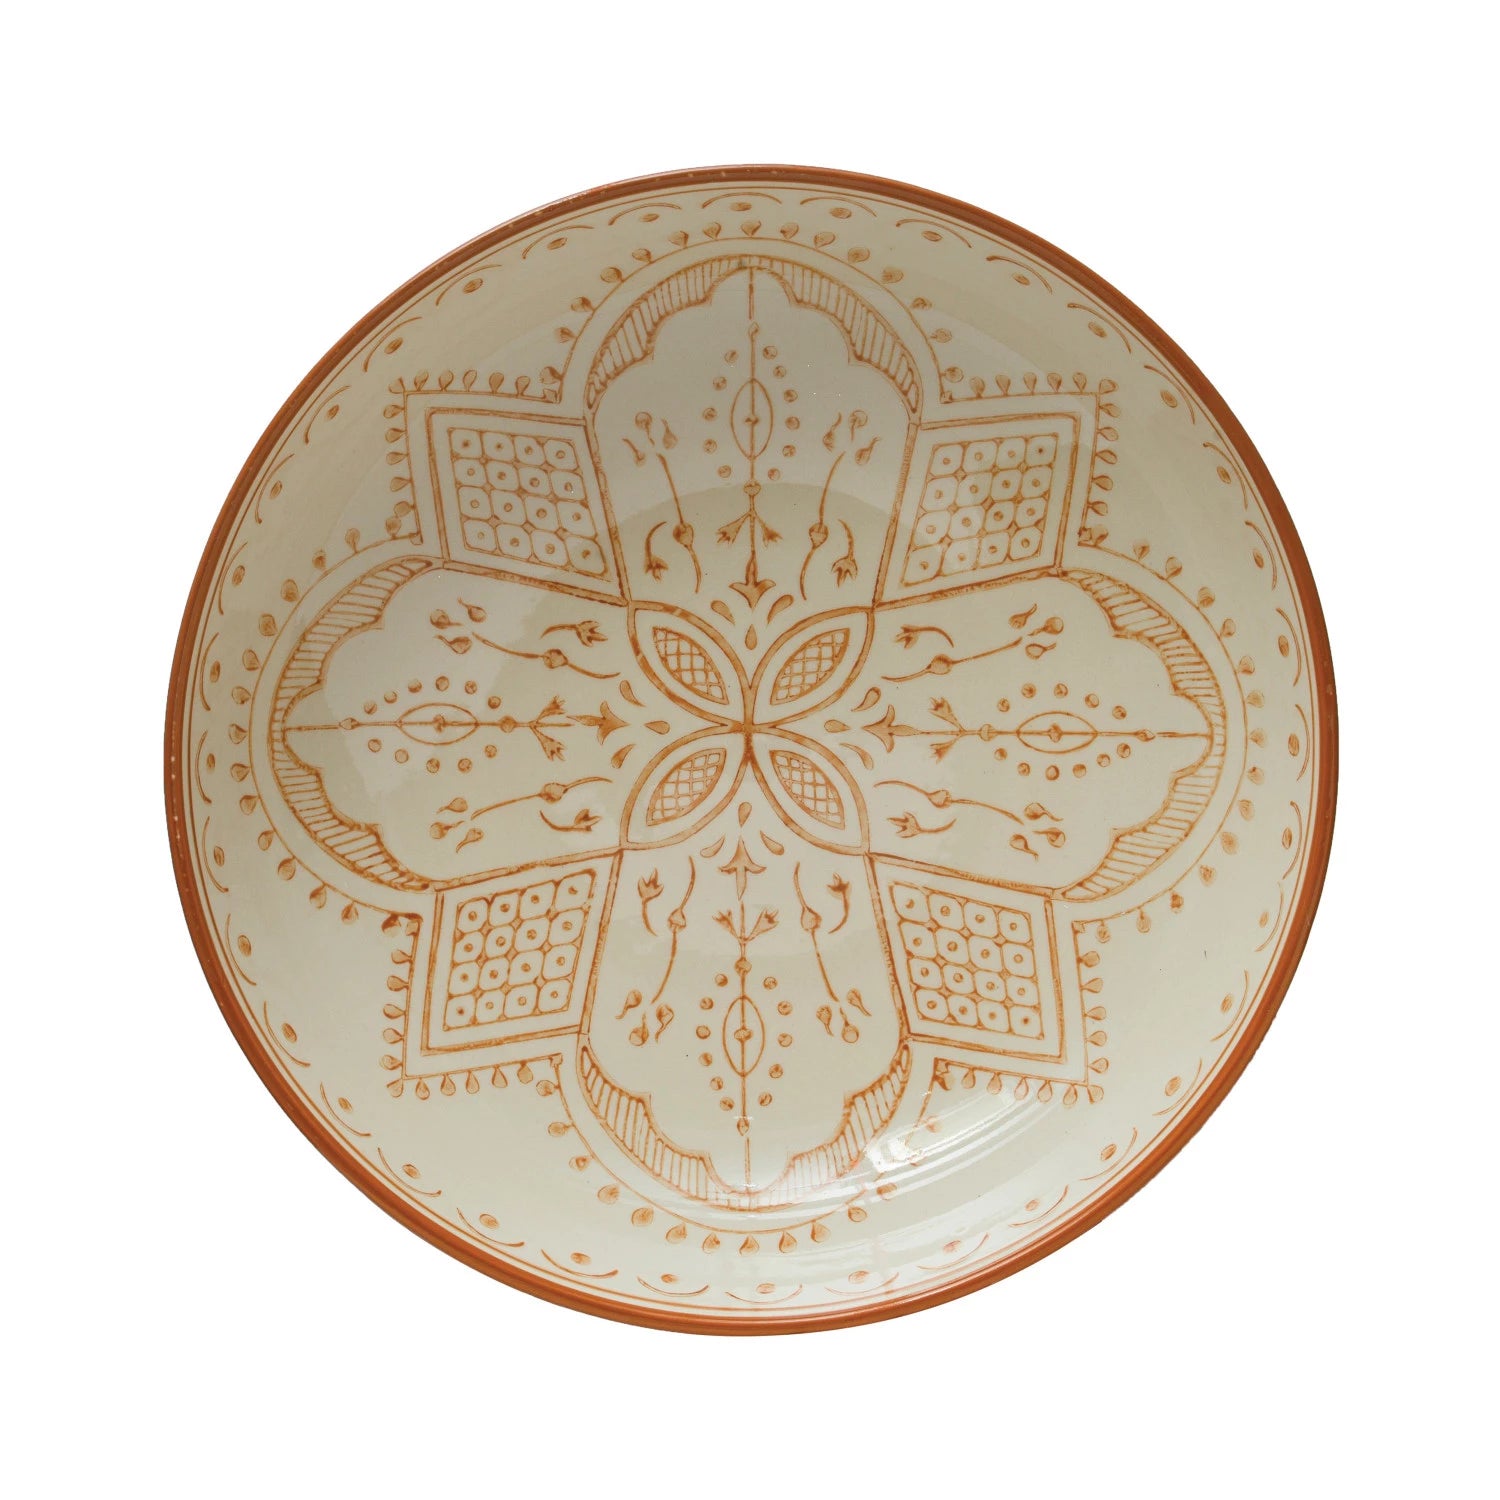 top view of cream bowl with intricate orange pattern in the interior.